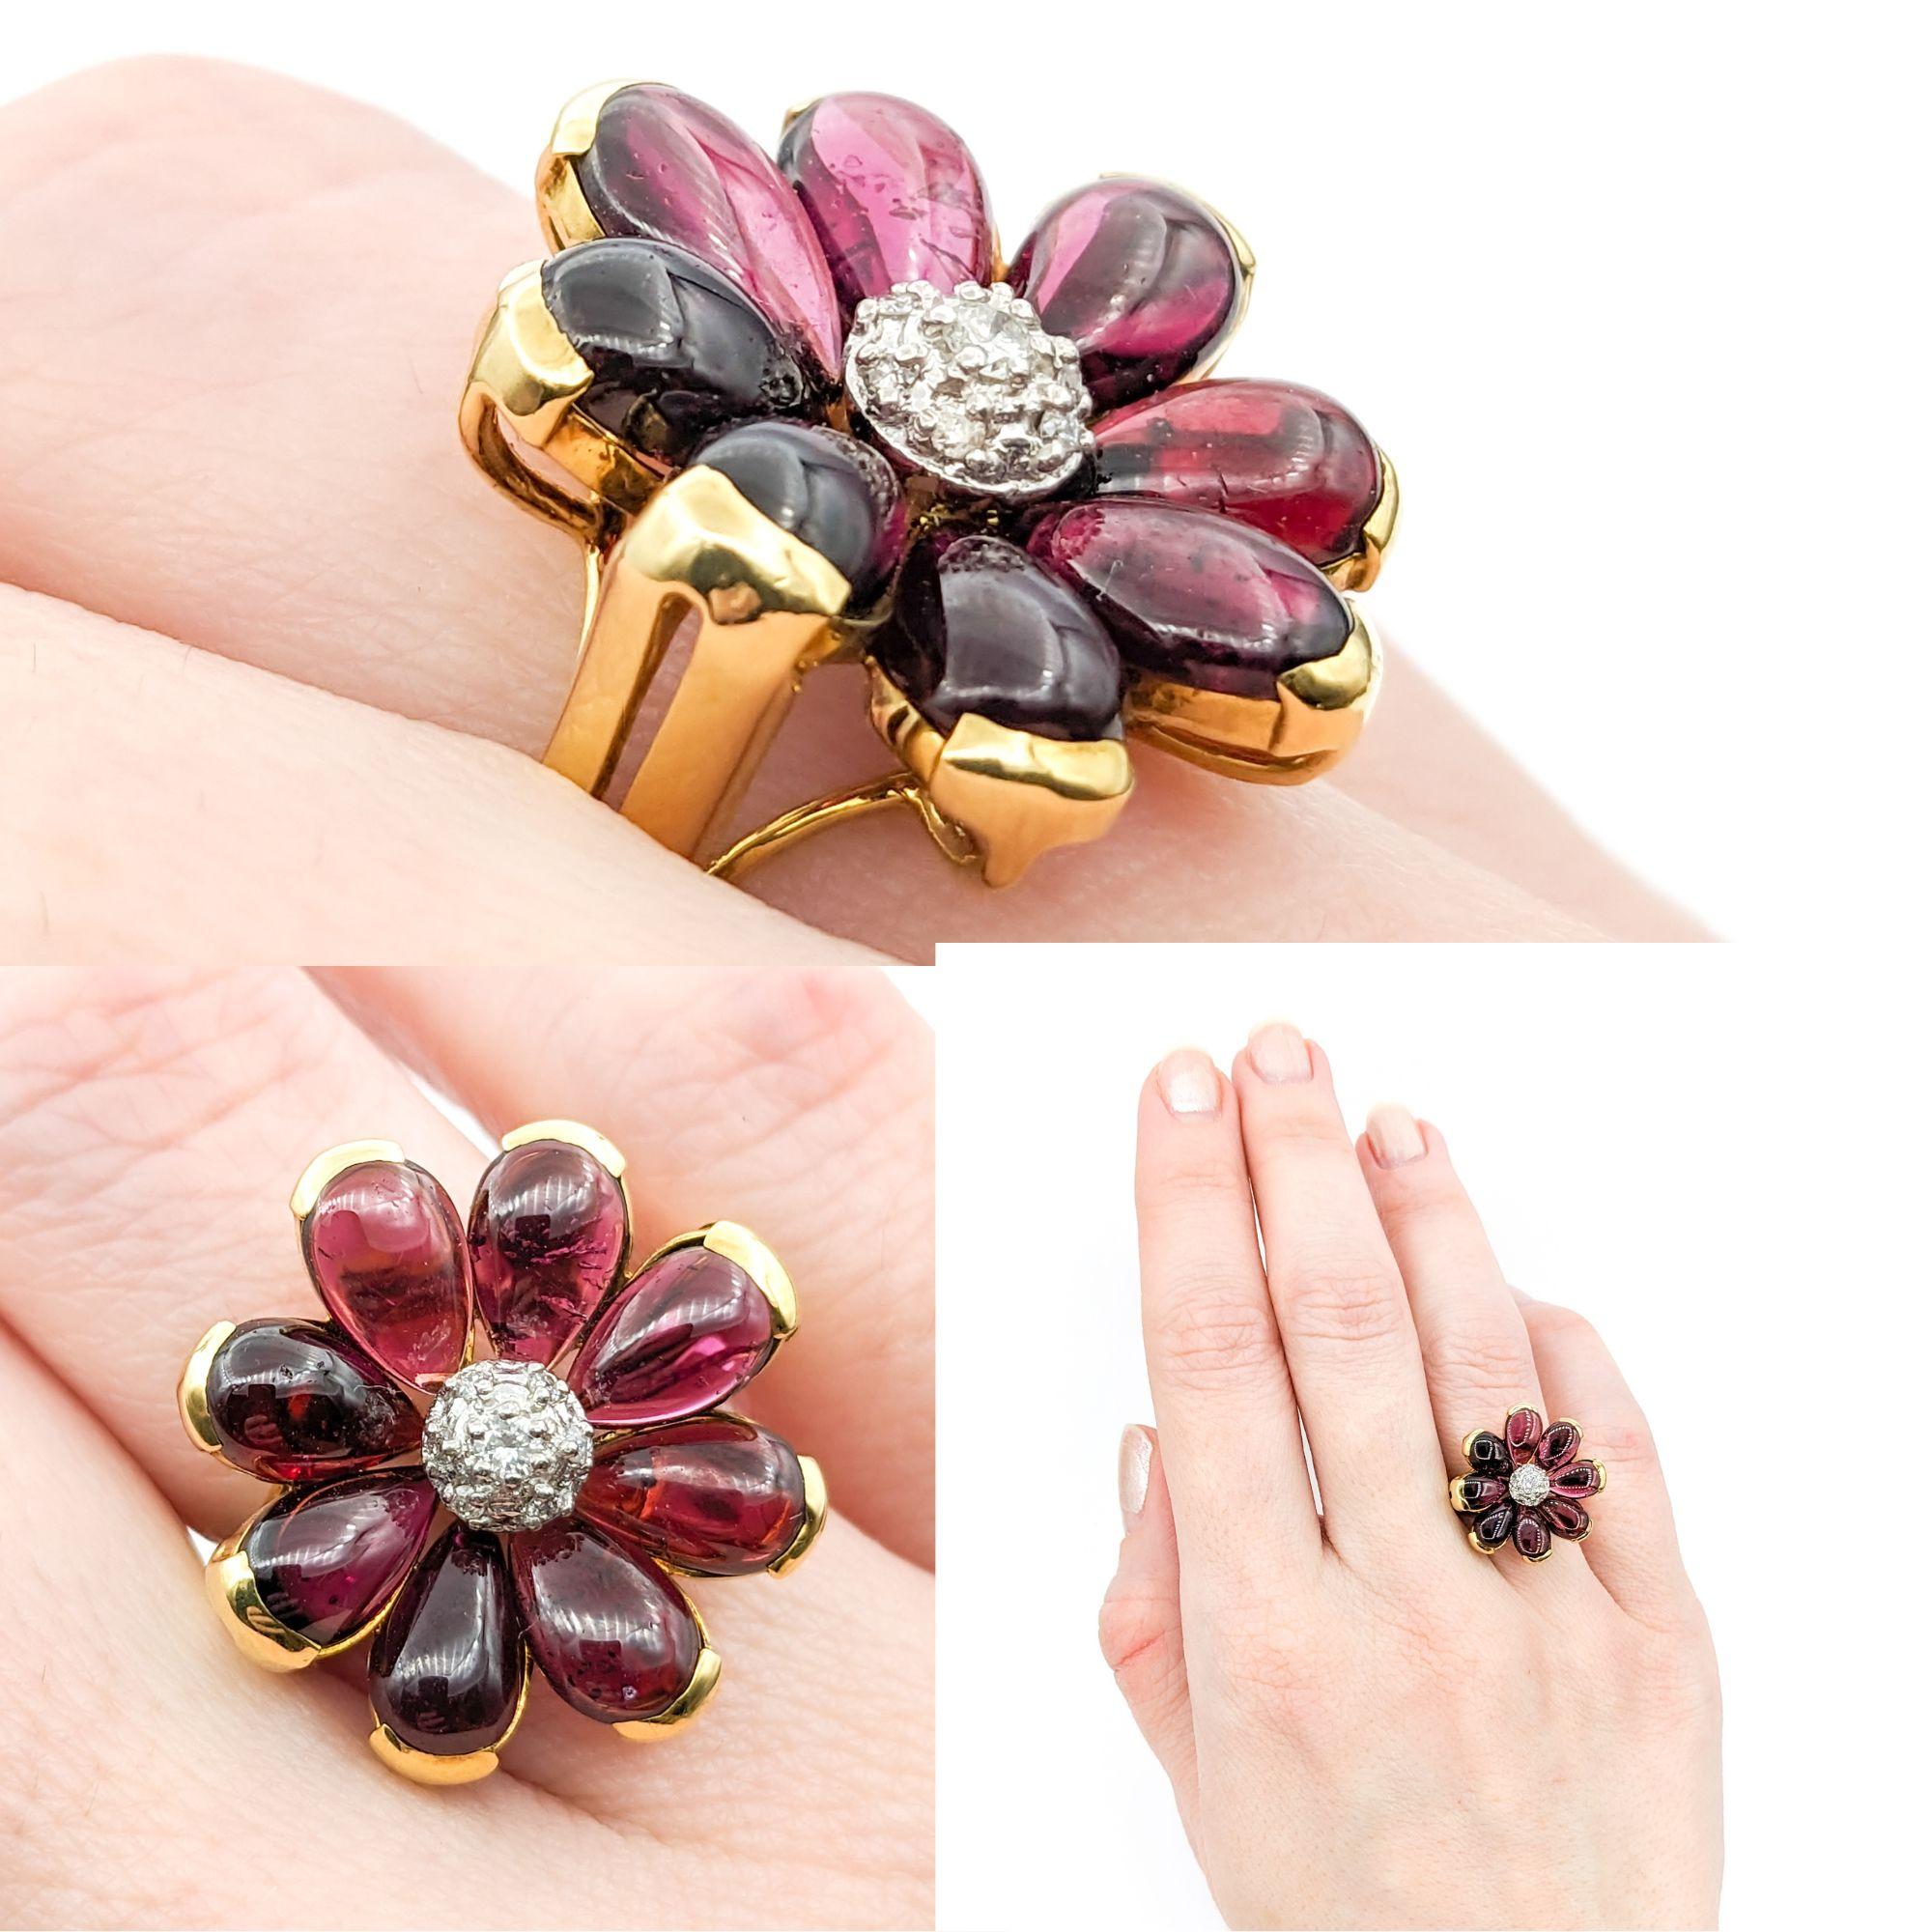 6ctw Pink Tourmaline Cabochon & Diamond Flower Ring In Yellow Gold

Introducing this whimsical pink tourmaline ring, meticulously crafted in 18k Yellow Gold. This ring features a playful flower design featuring striking 6ctw of pink tourmaline in